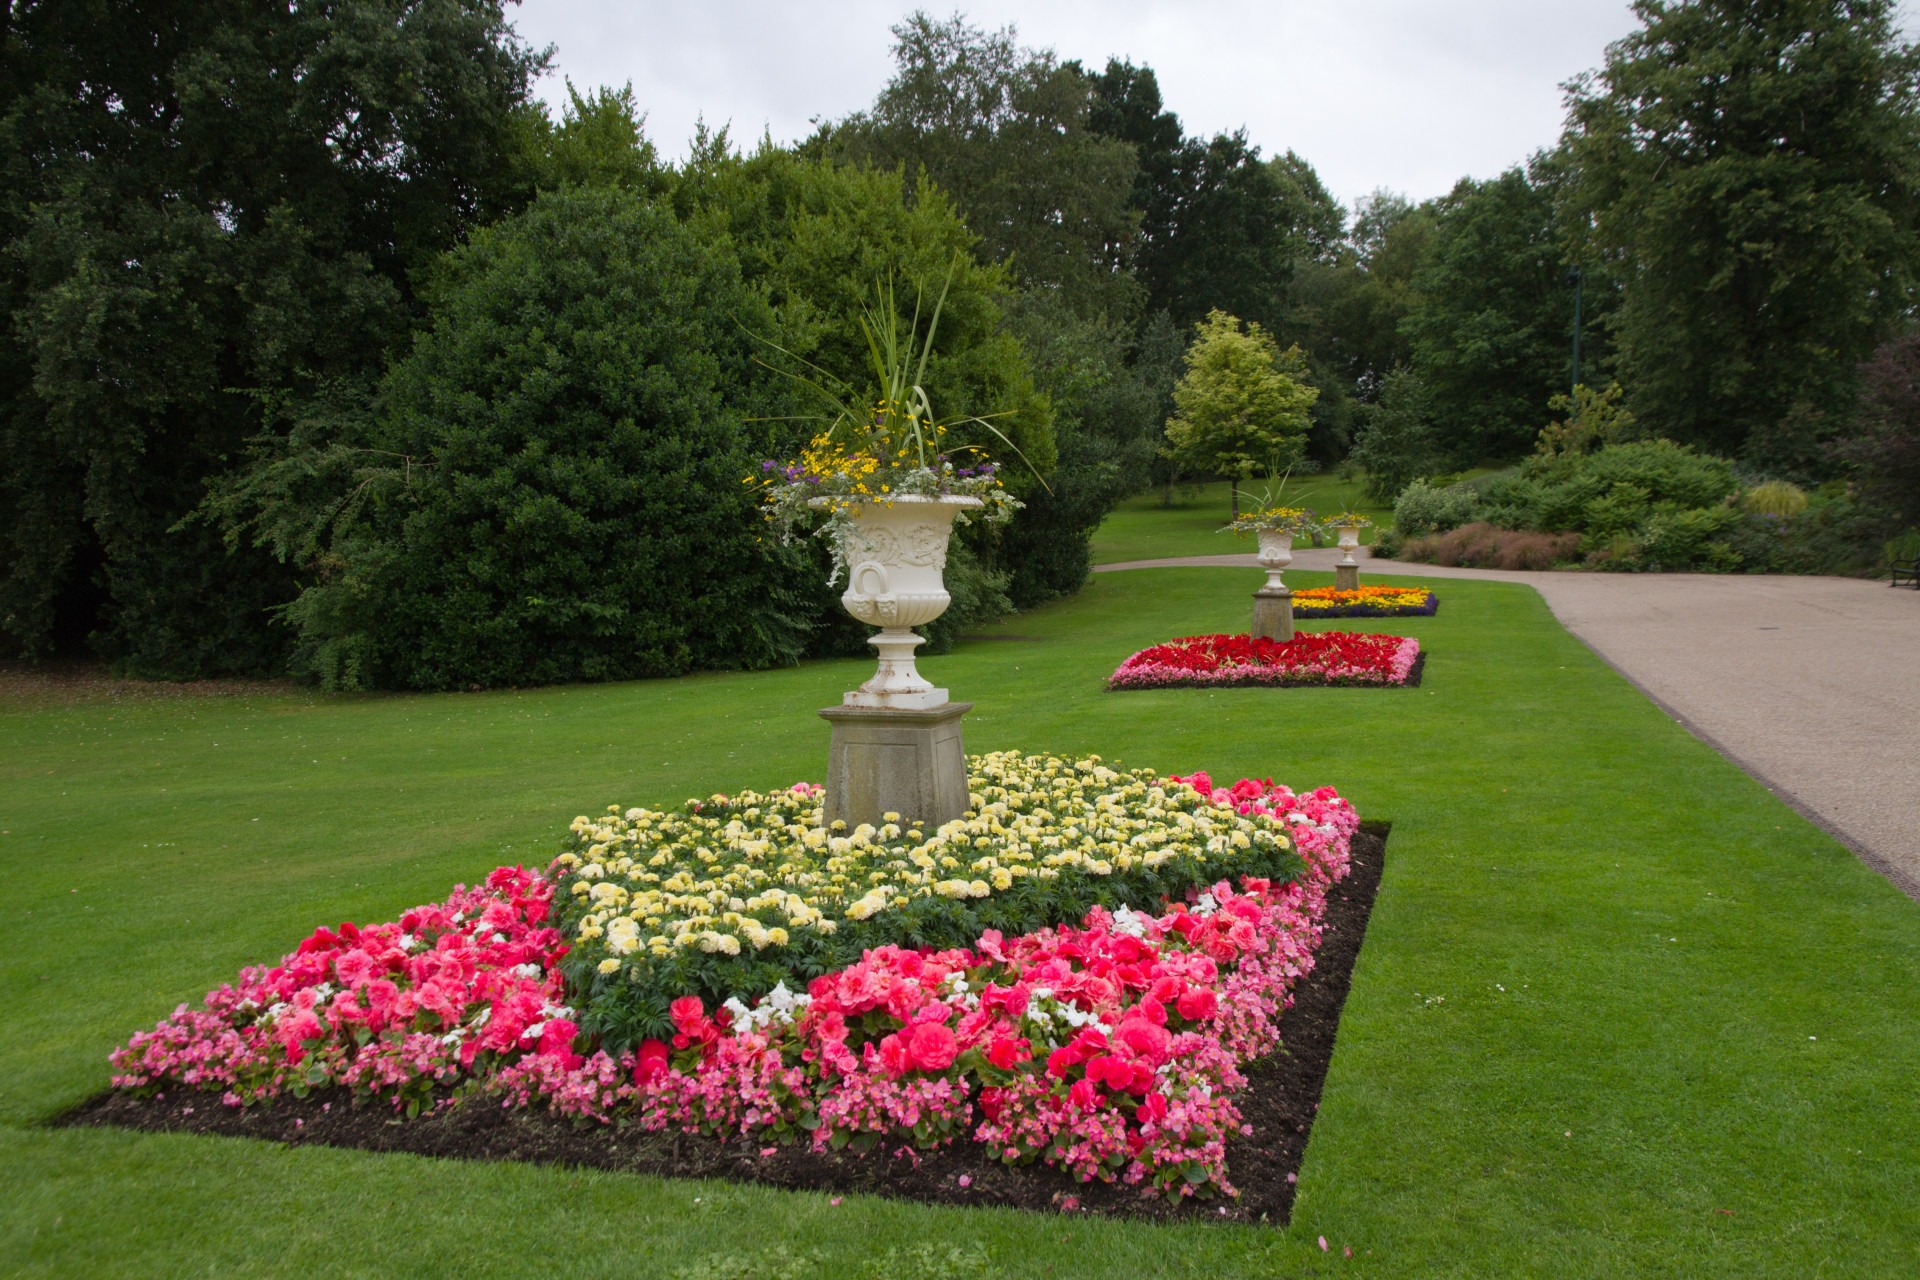 A flowerbed arrangement at Weston Park in Sheffield. <p>You may also like:<a href="https://www.starsinsider.com/n/500982?utm_source=msn.com&utm_medium=display&utm_campaign=referral_description&utm_content=344596v2en-en"> English words that have a different meaning in other languages</a></p>